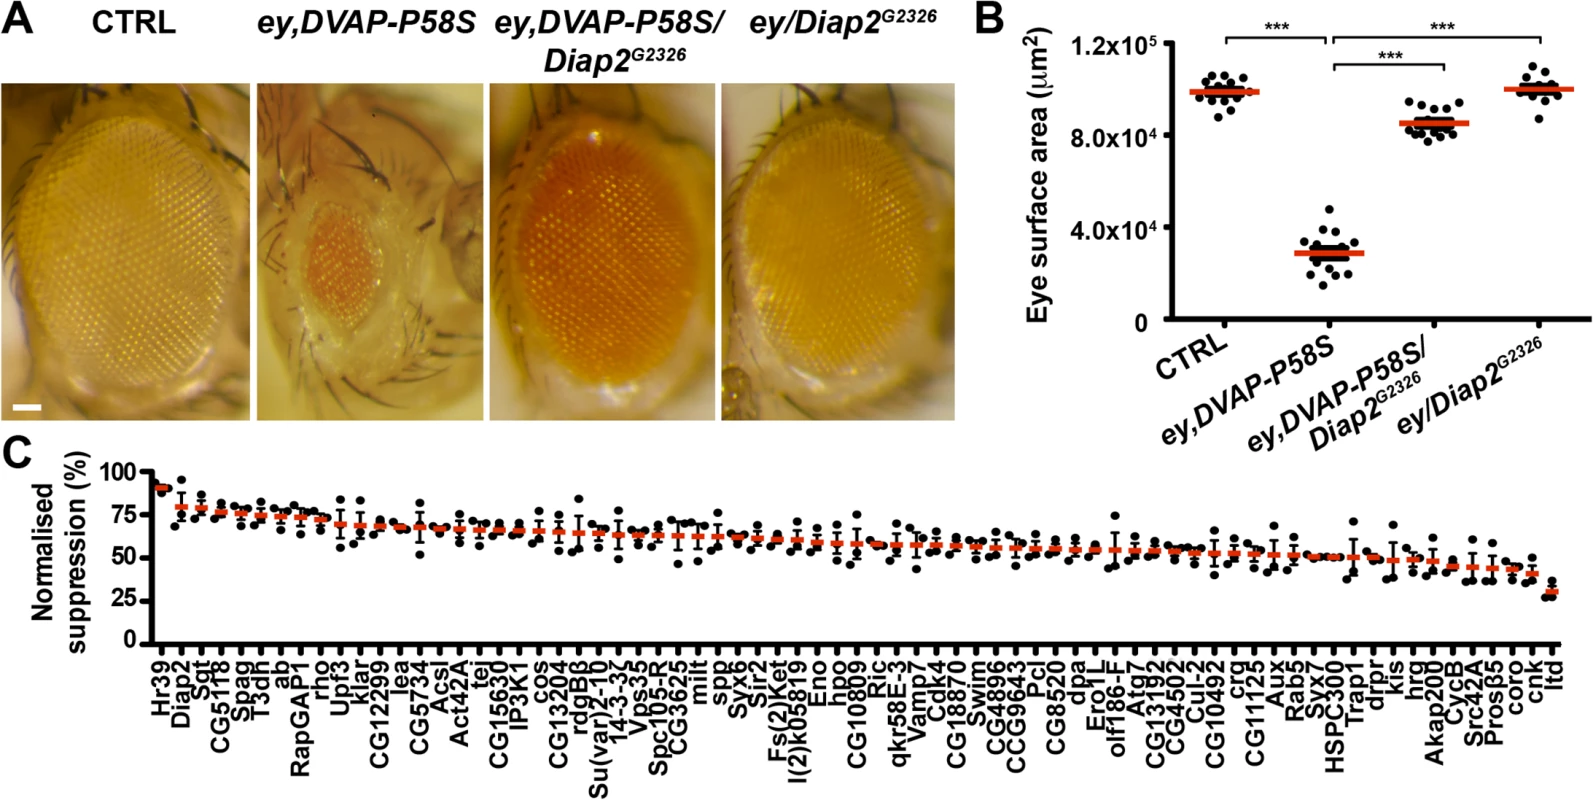 An overexpression screen for modifiers of the DVAP-P58S eye phenotype identified 71 suppressors.